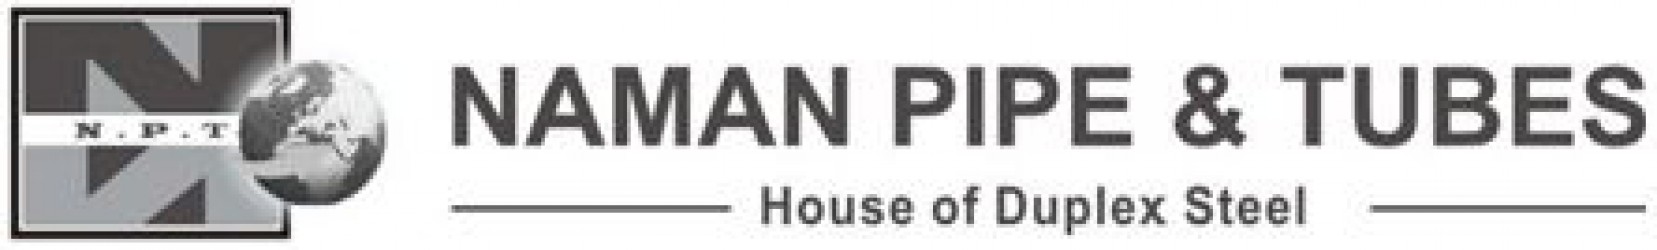 Naman Pipes & Tubes House Of Duplex Steel